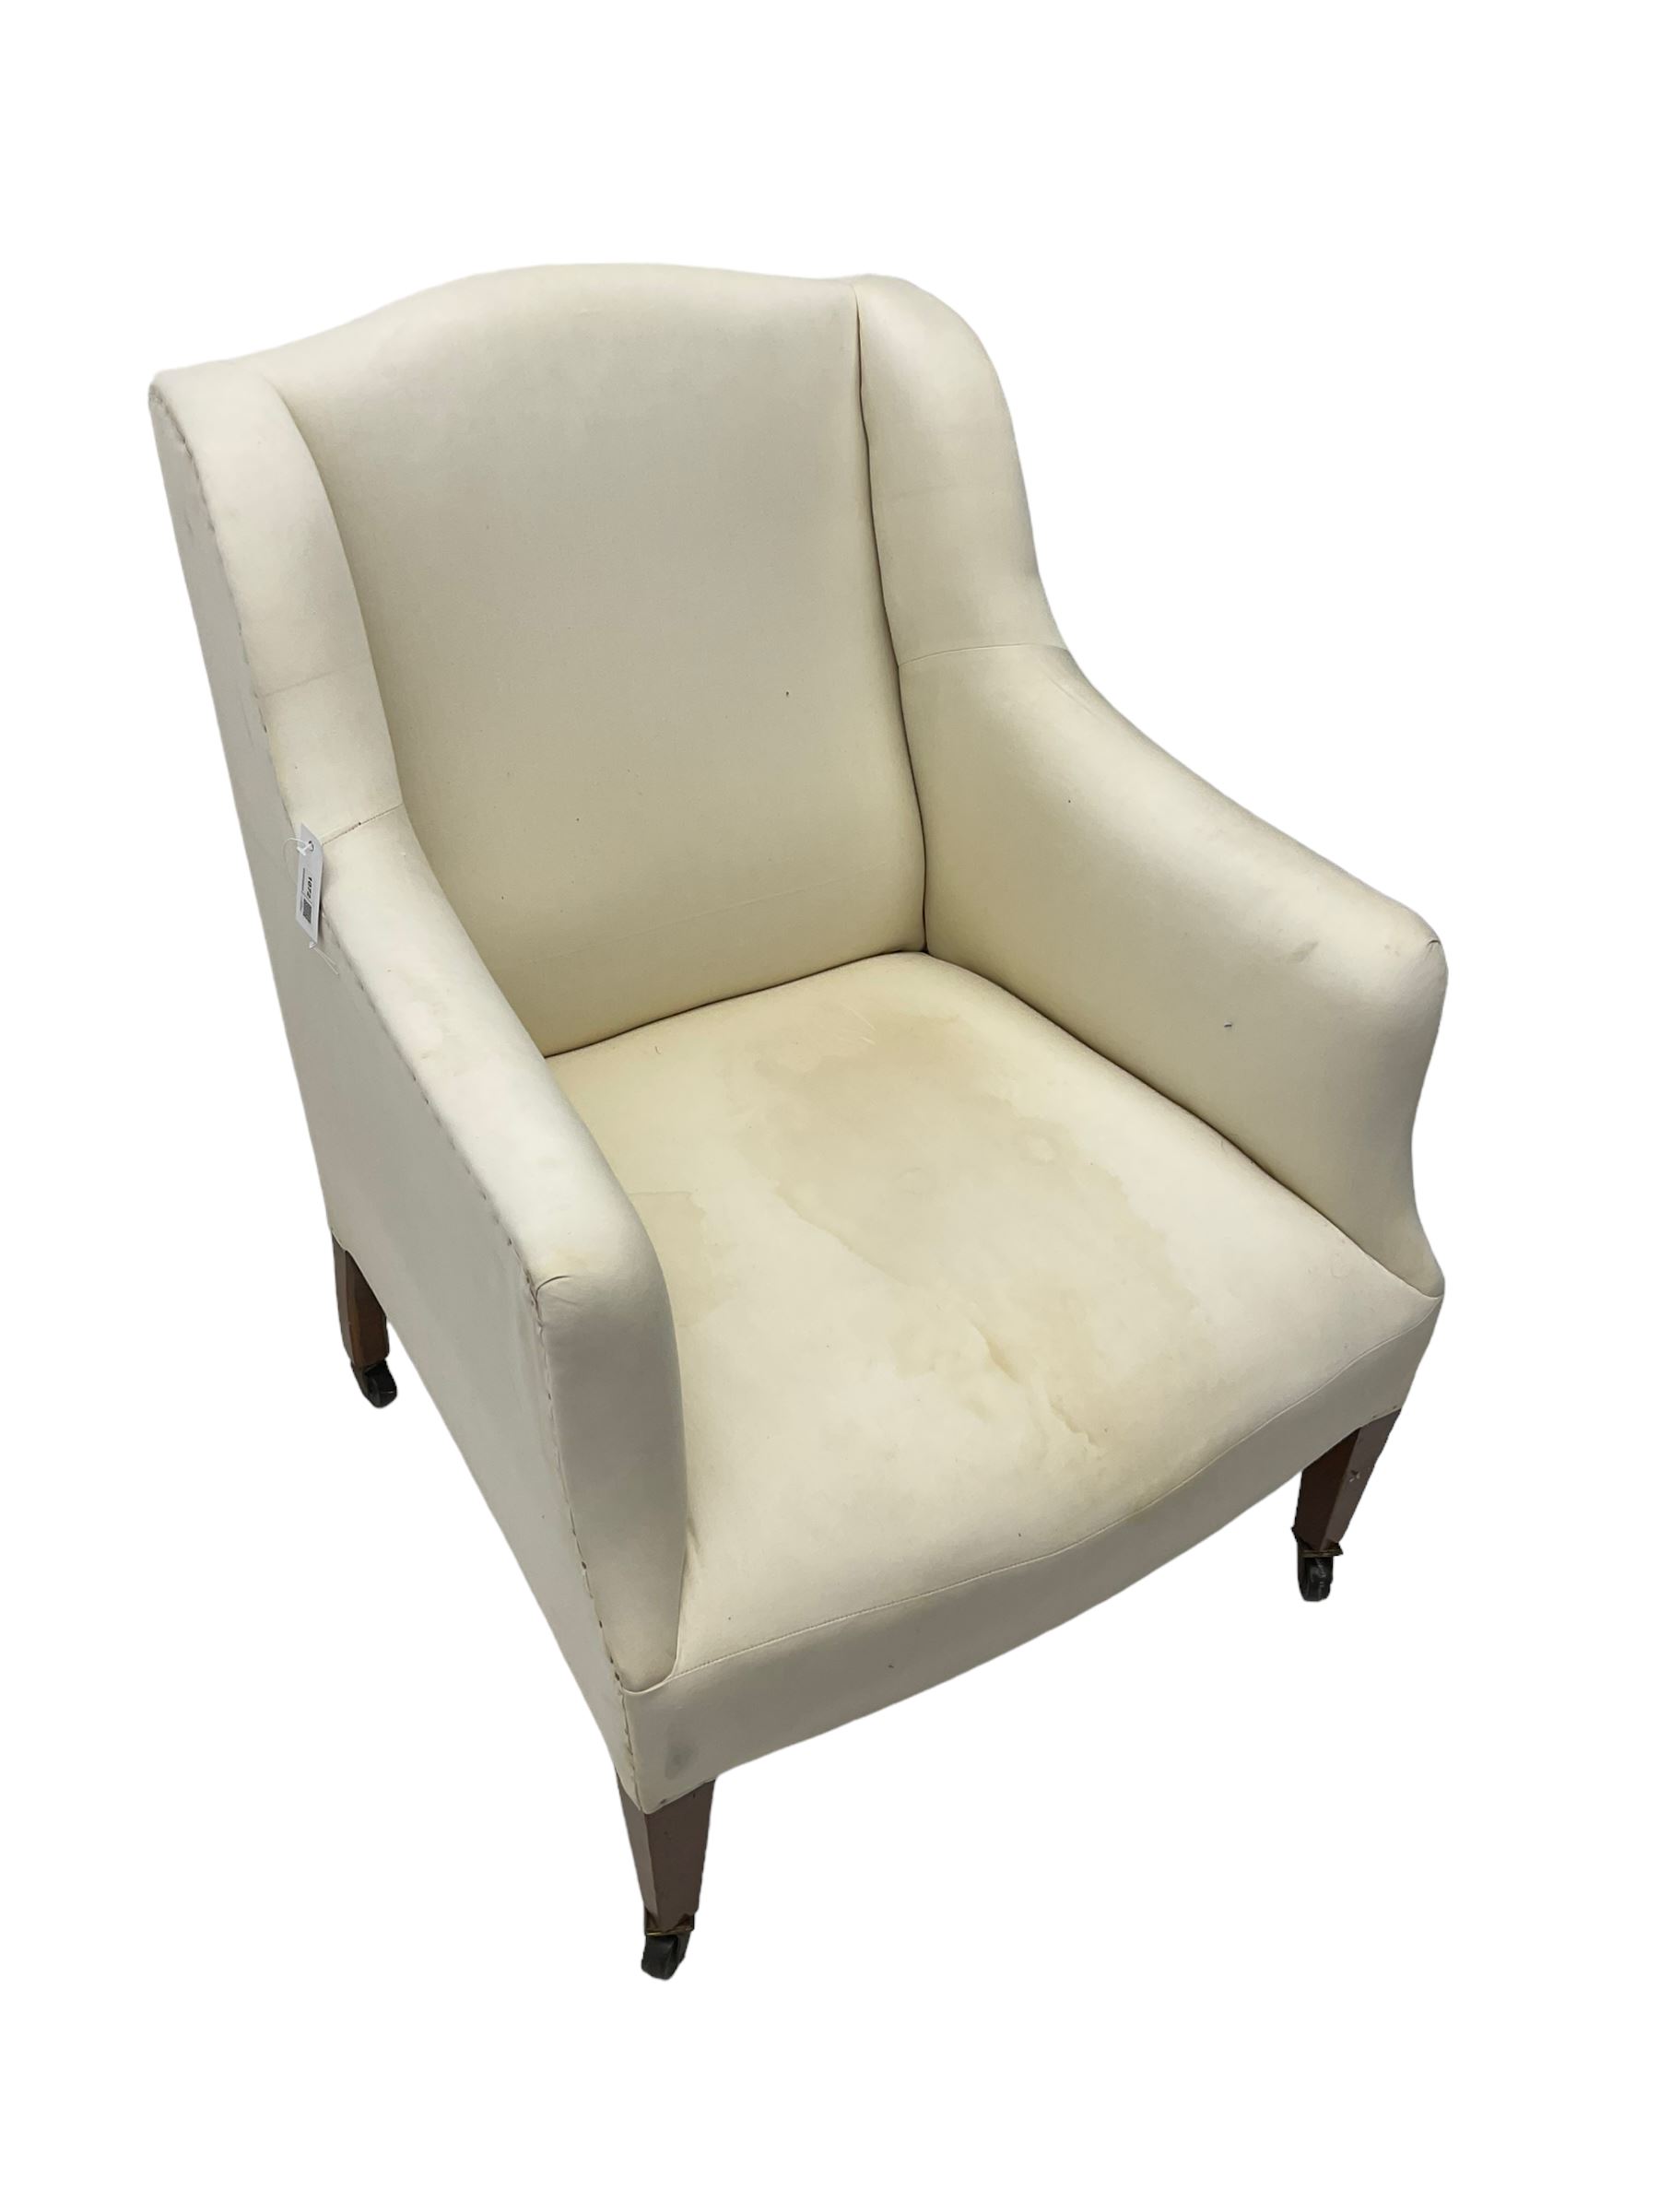 Edwardian wingback armchair - Image 5 of 5